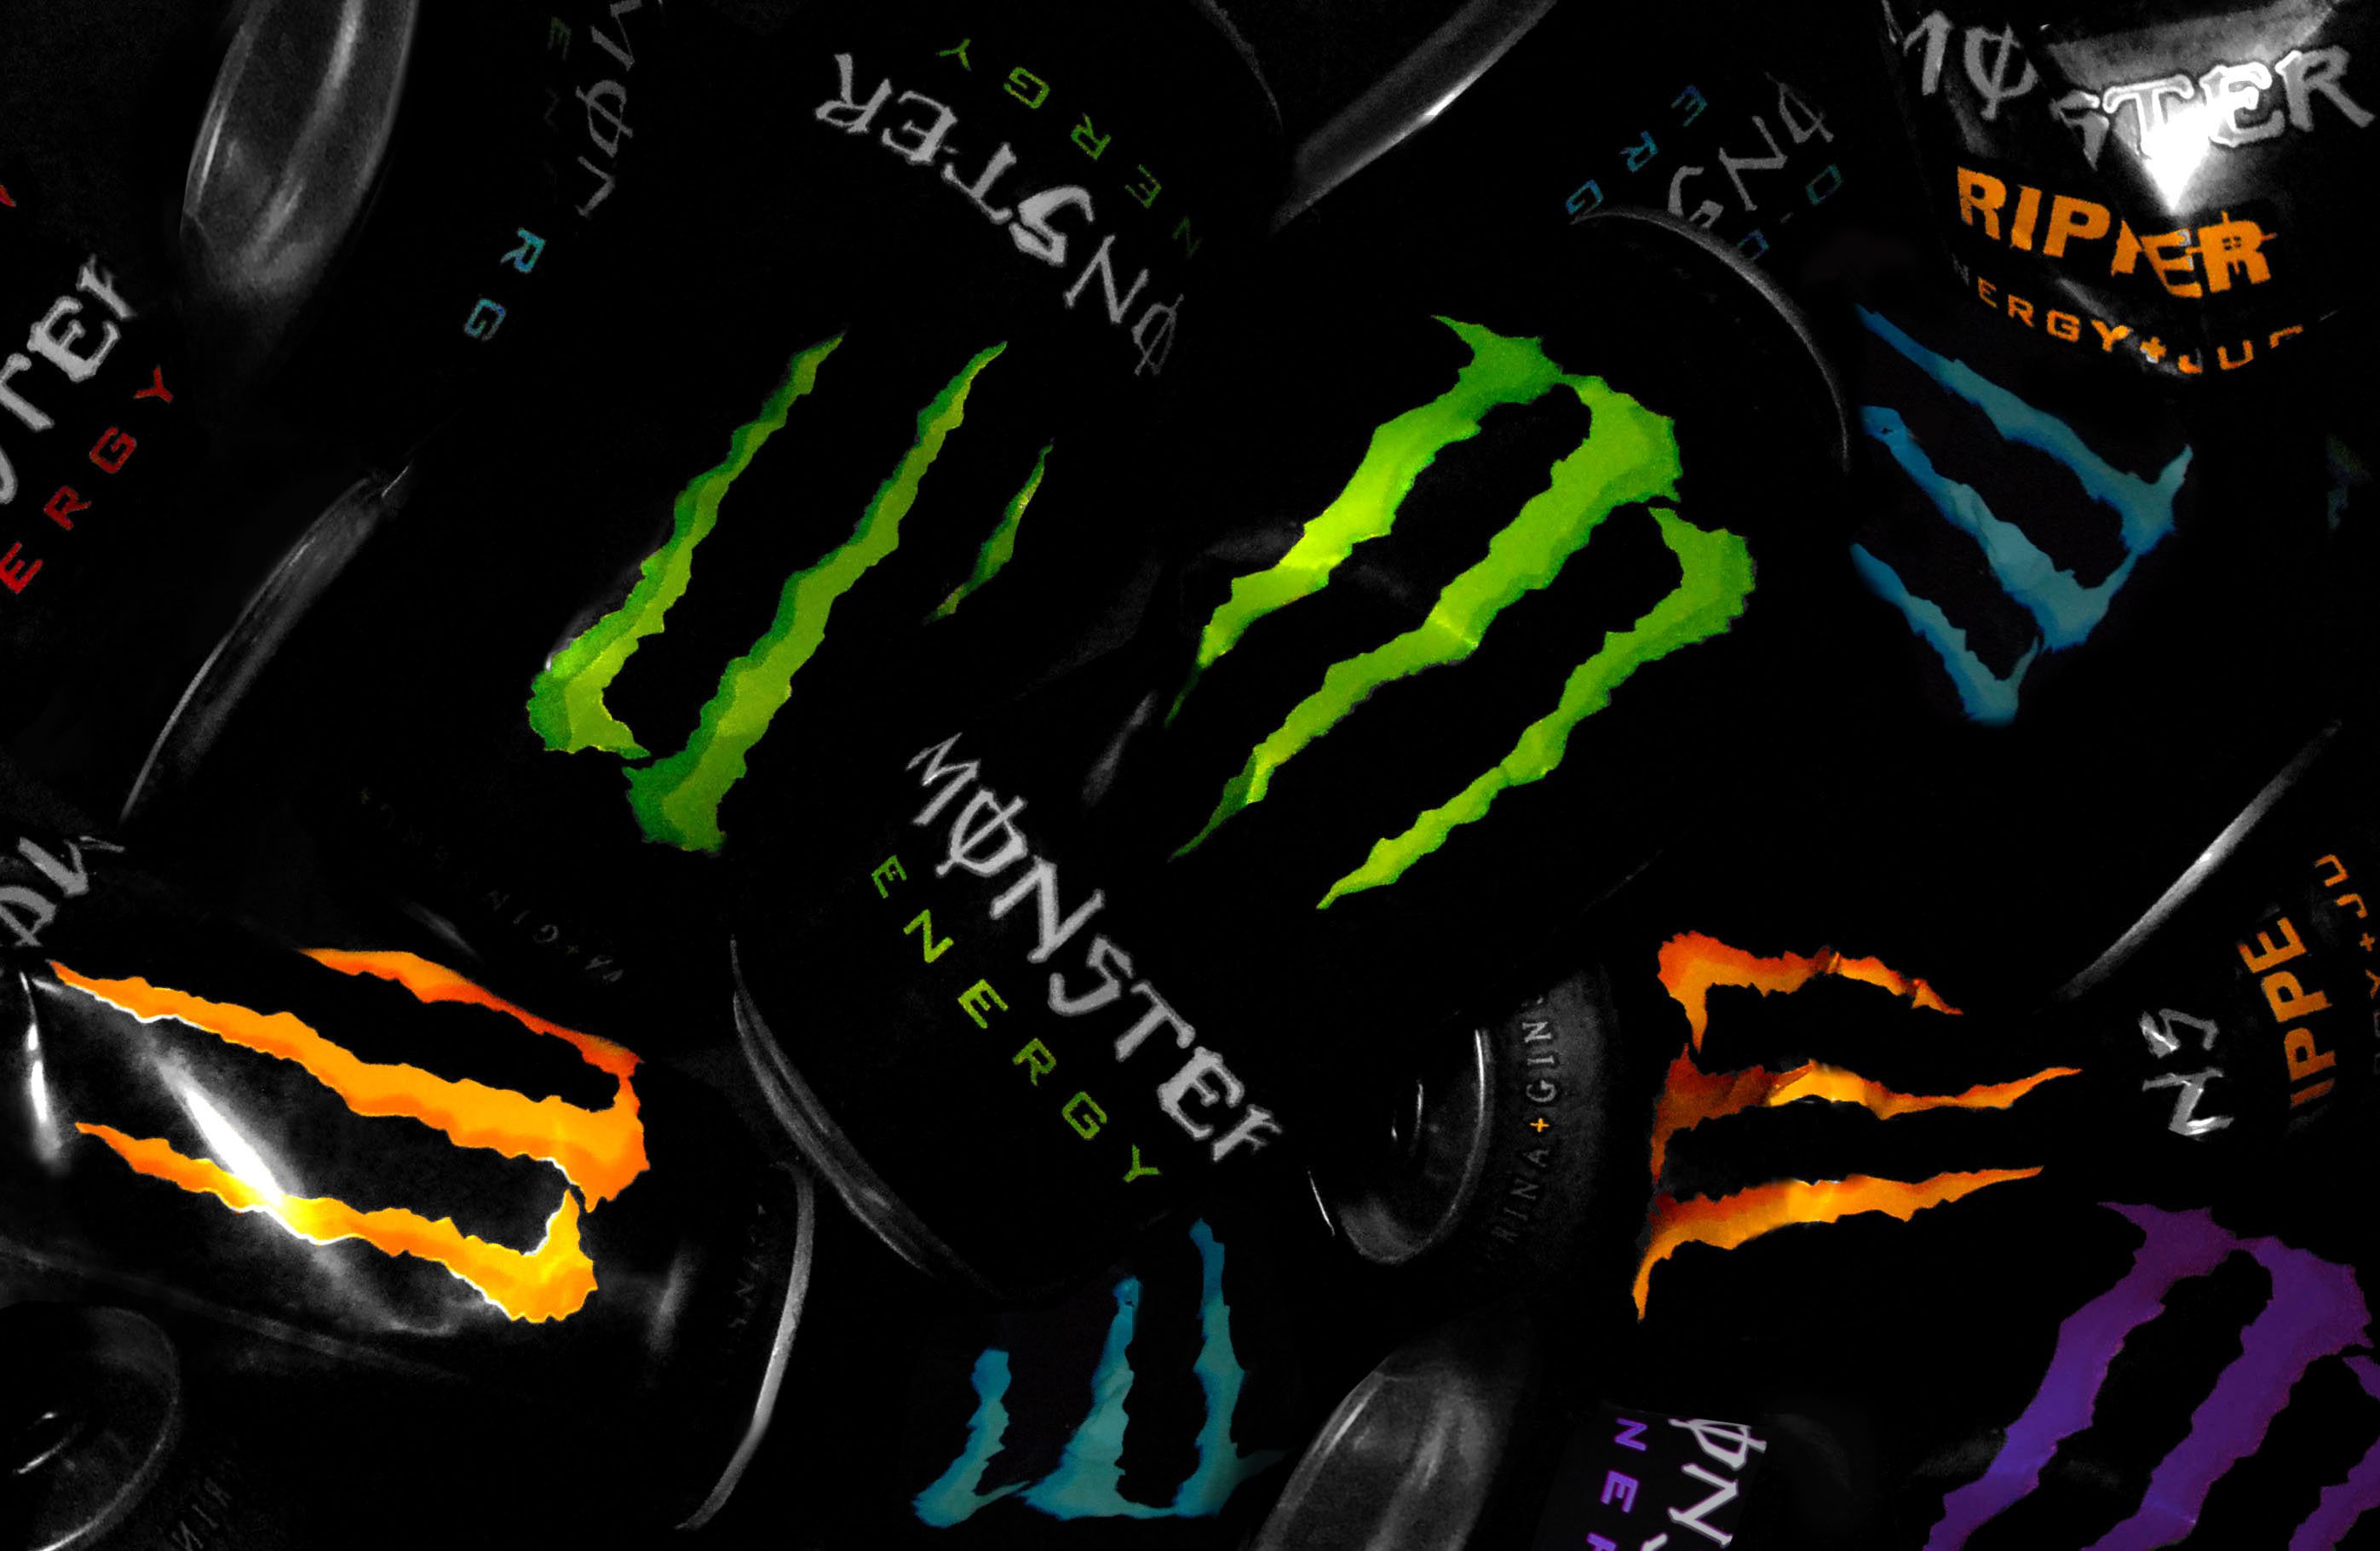 many monster energy tins photo picture hd wallpaper free drink brands logo picture monster energy backgrounds hd Wallpaper